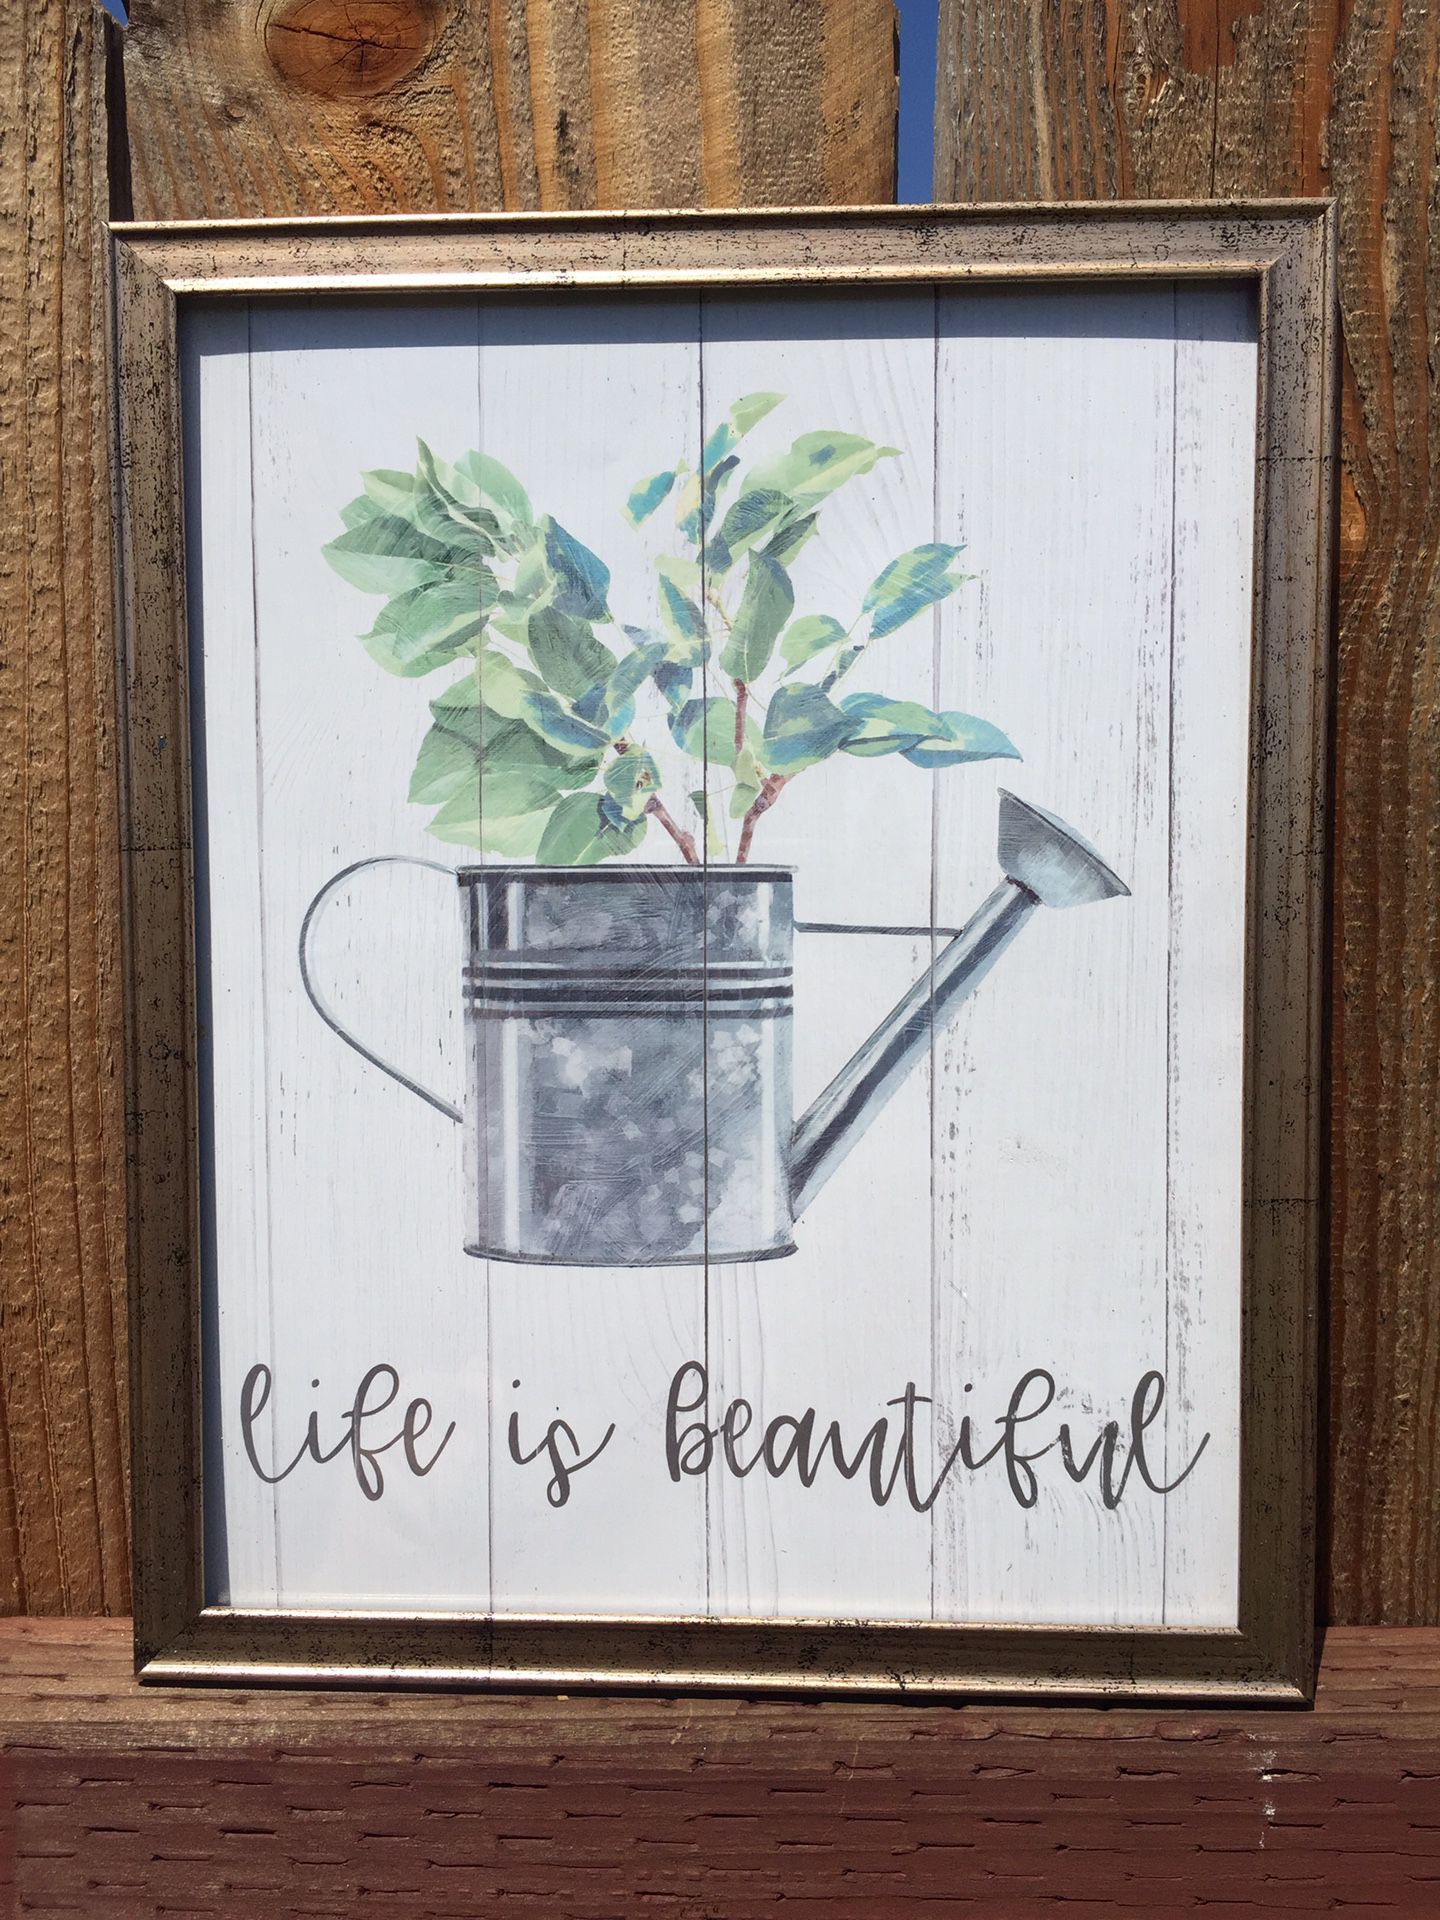 Beautiful Gold frame with flower pot says “life is beautiful”